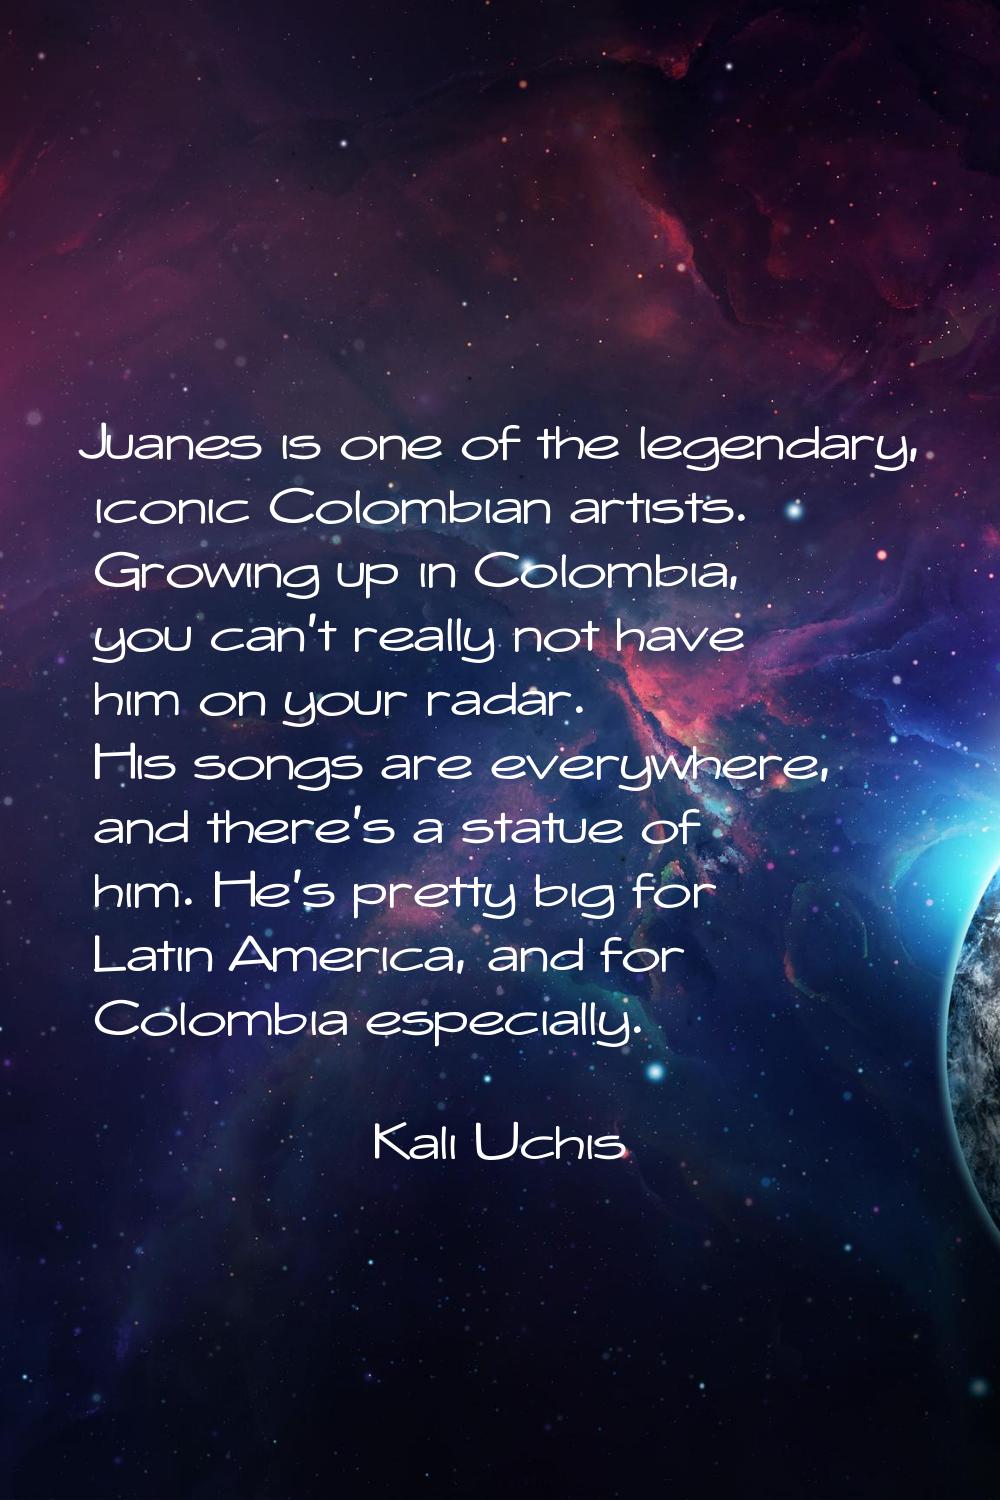 Juanes is one of the legendary, iconic Colombian artists. Growing up in Colombia, you can't really 